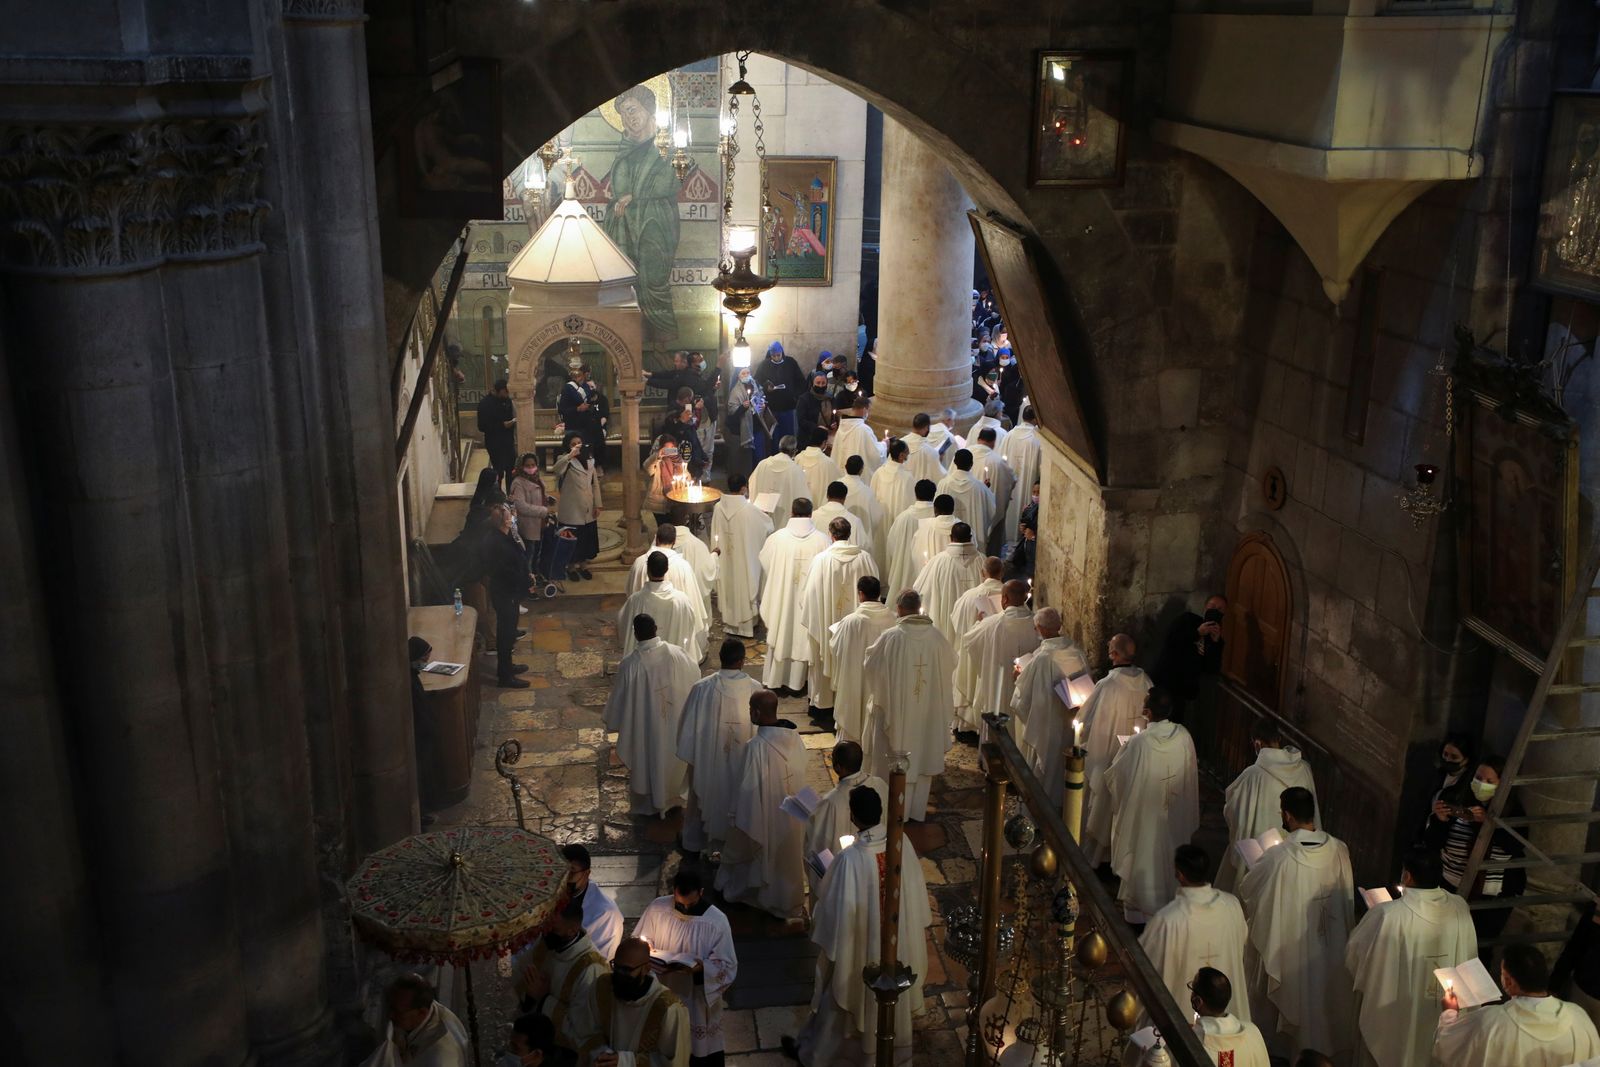 Worshippers take part in a procession during the Catholic Washing of the Feet ceremony on Easter Holy Week in the Church of the Holy Sepulchre in Jerusalem's Old City - REUTERS